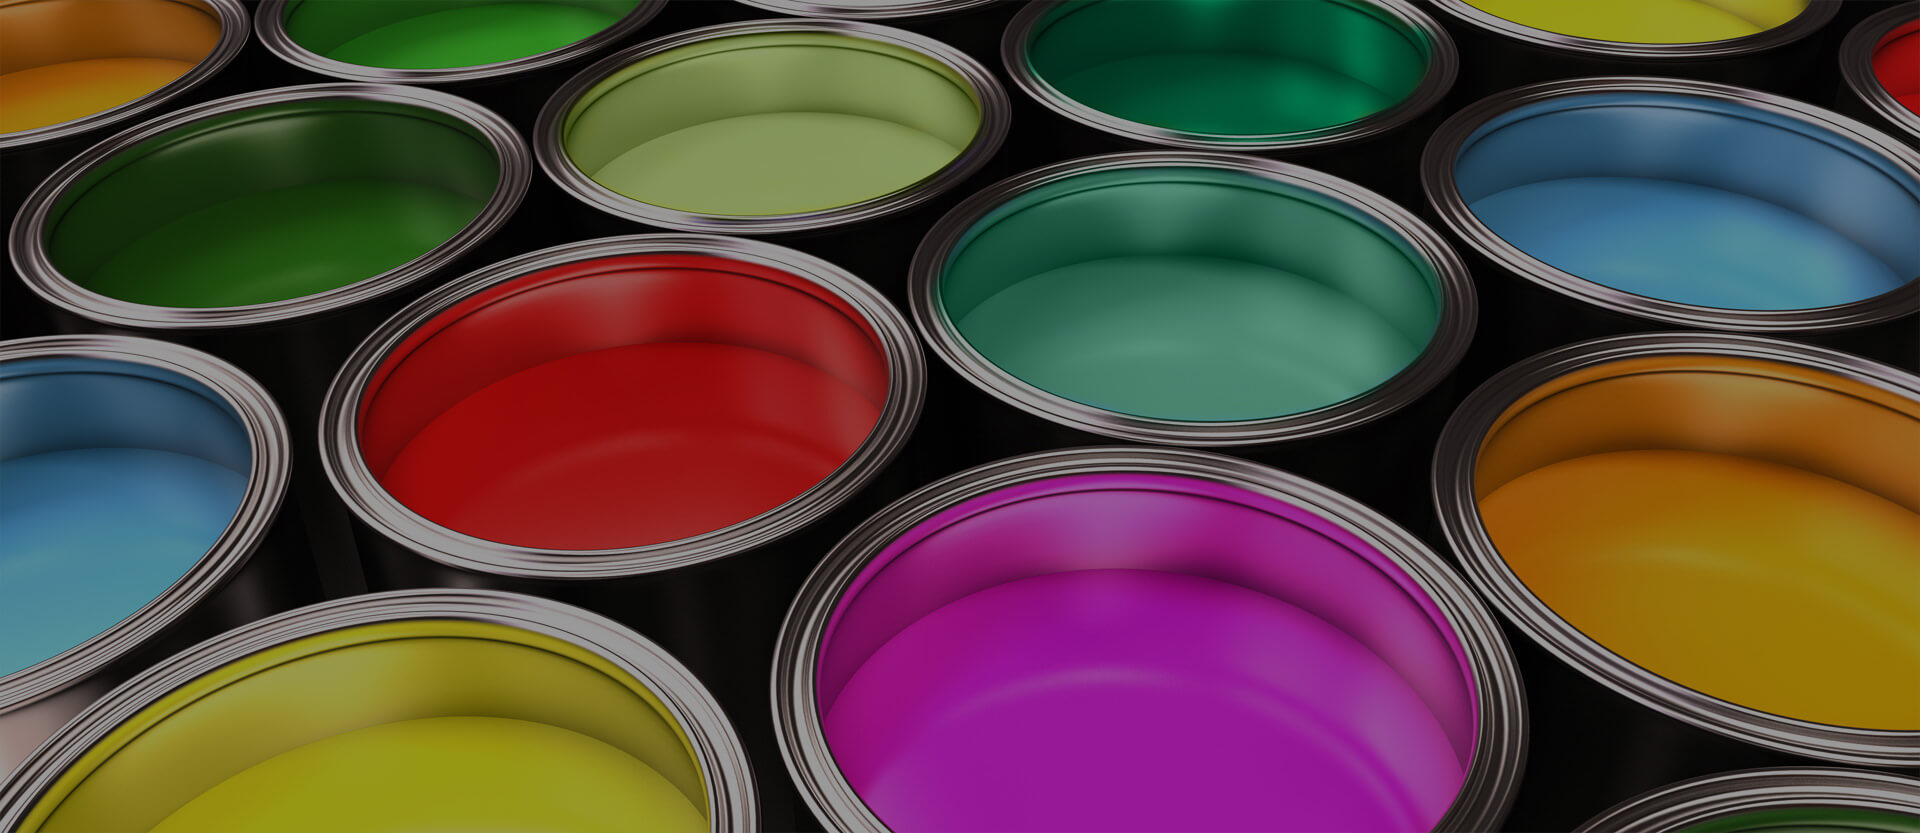 paints-coatings-industry-EHS-software-system.jpg